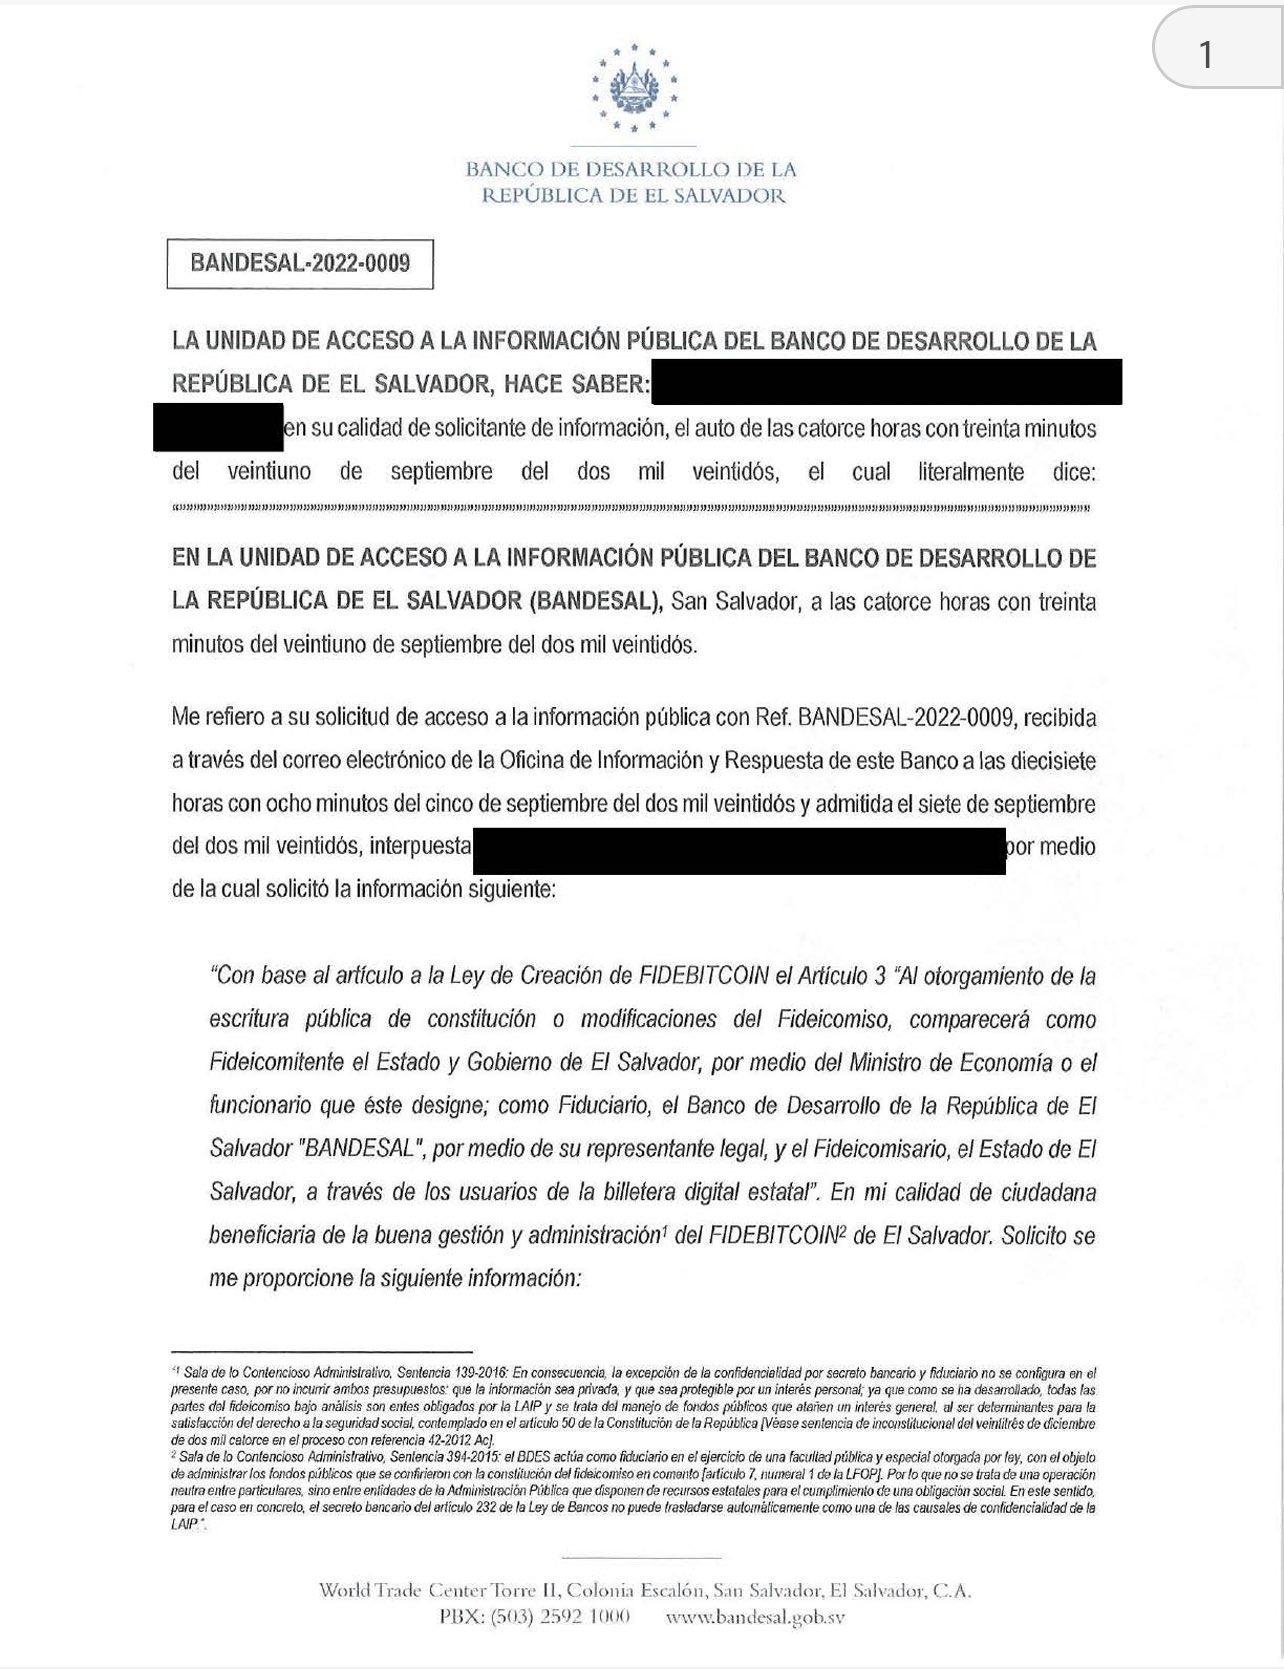 El Salvadors Bitcoin purchase information cant be made public Trustee